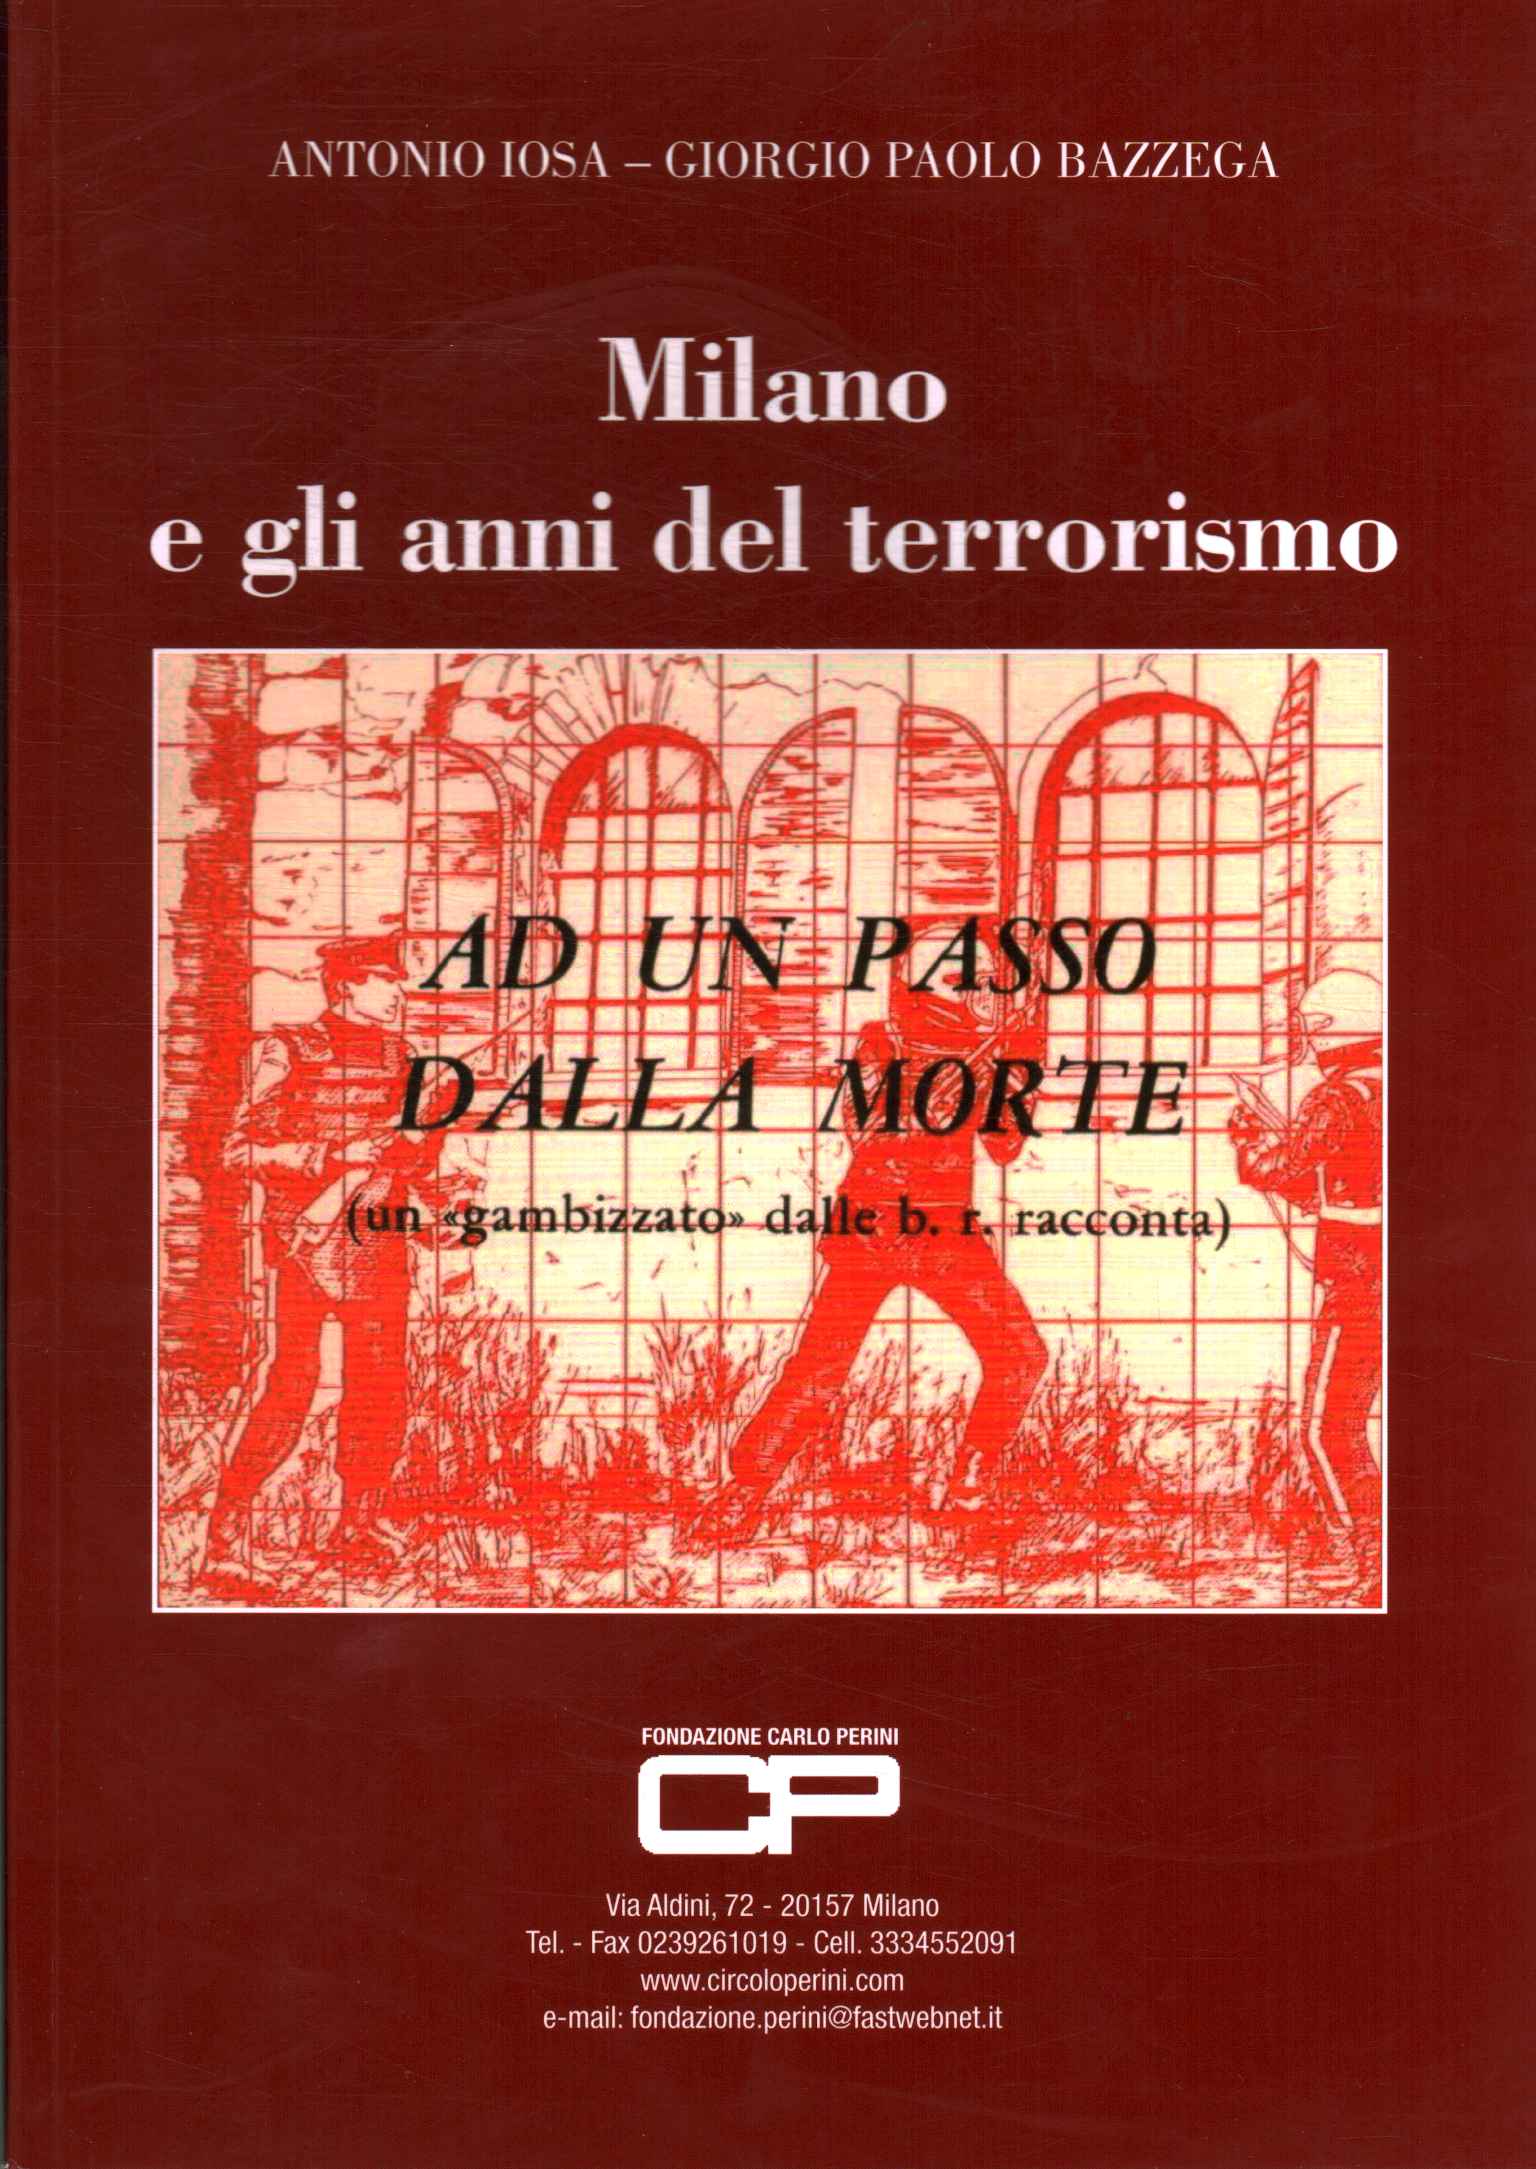 Milan and the years of terrorism,Milan and the years of terrorism